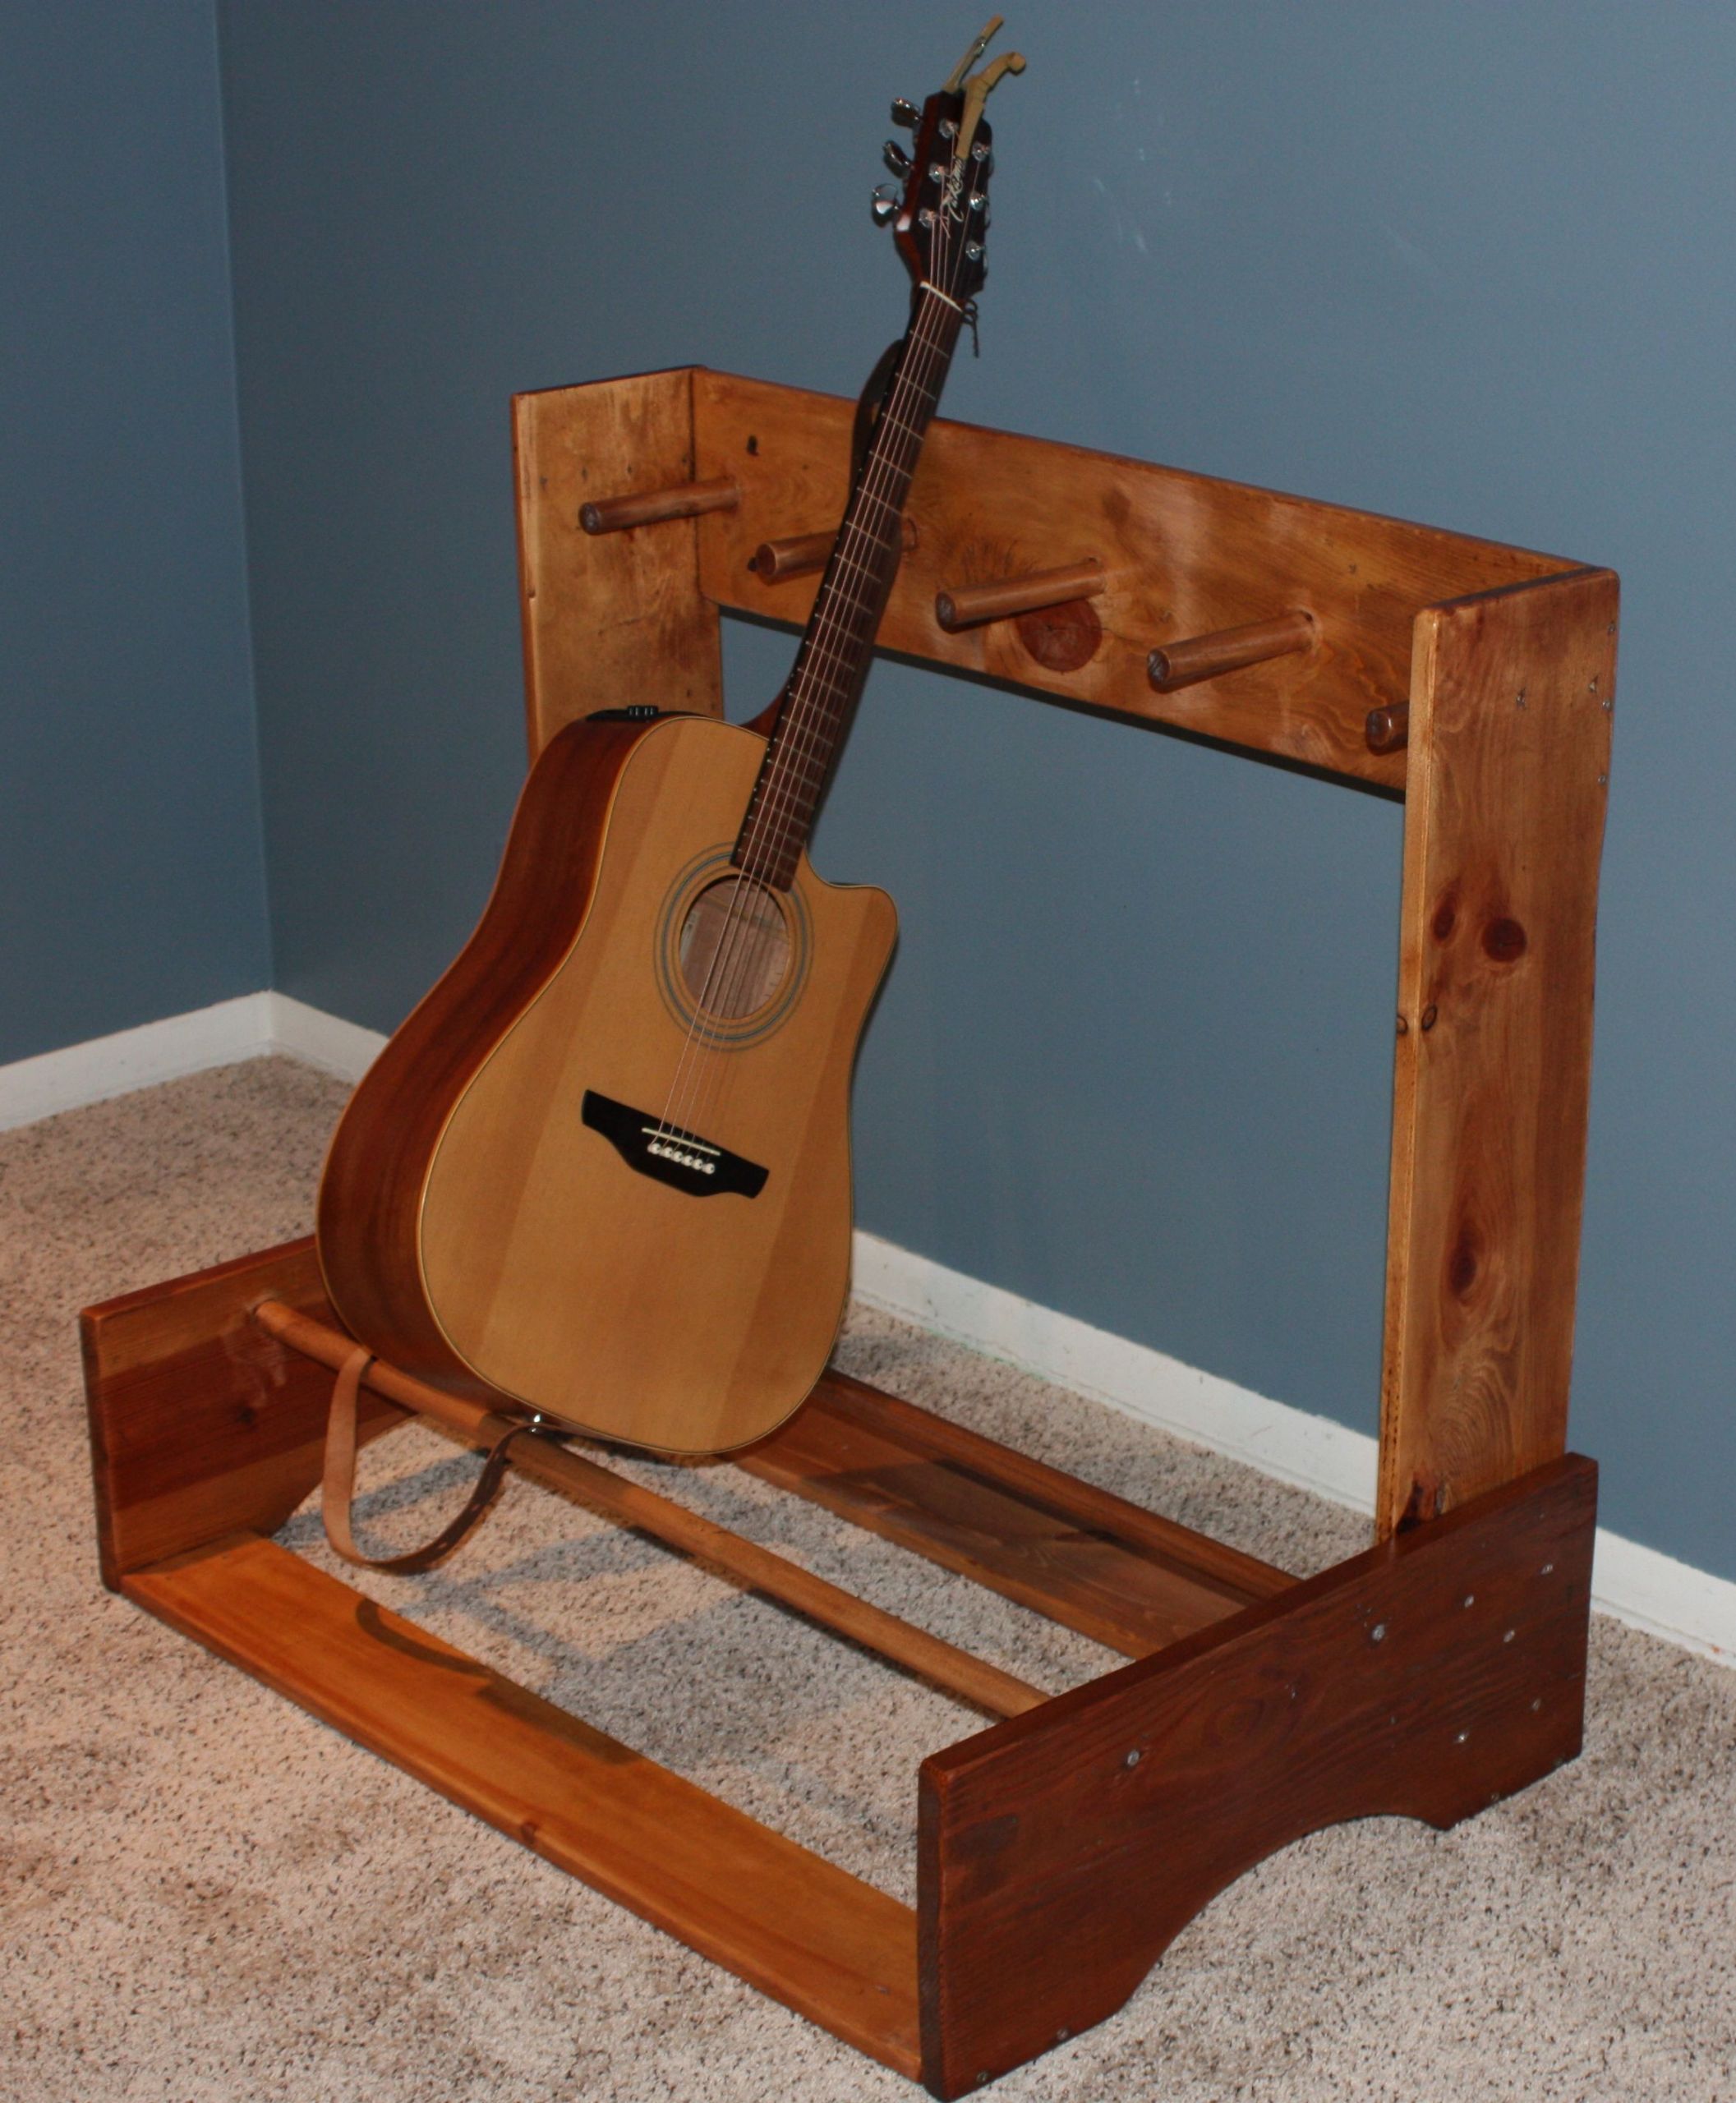 DIY Rack Case Plans
 I made this Guitar Stand designed for 4 guitars in case I